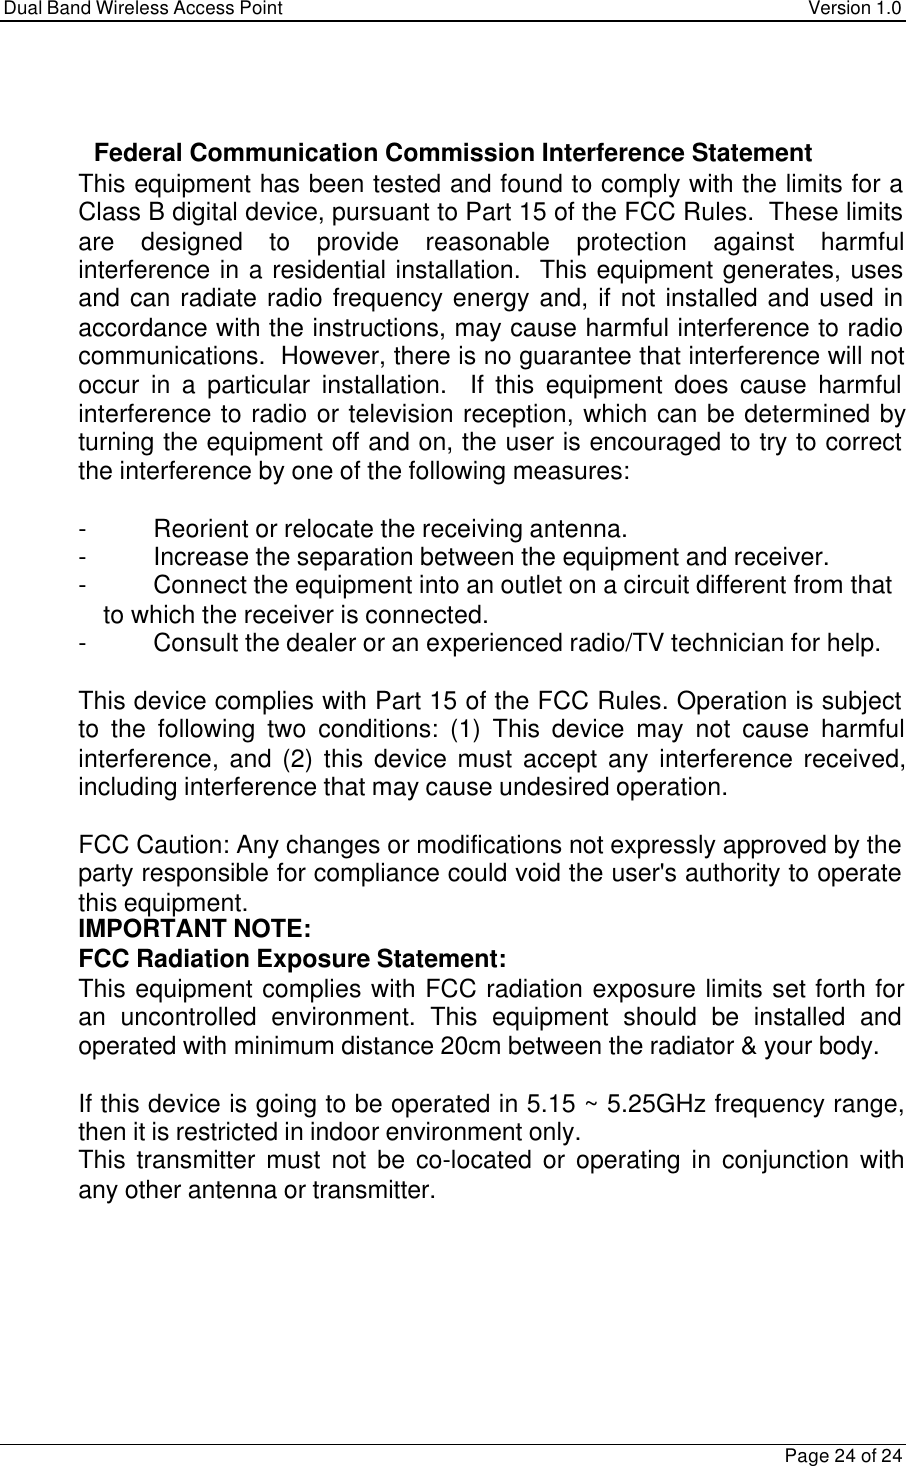 Dual Band Wireless Access Point Version 1.0Page 24 of 24   Federal Communication Commission Interference Statement This equipment has been tested and found to comply with the limits for aClass B digital device, pursuant to Part 15 of the FCC Rules.  These limitsare designed to provide reasonable protection against harmfulinterference in a residential installation.  This equipment generates, usesand can radiate radio frequency energy and, if not installed and used inaccordance with the instructions, may cause harmful interference to radiocommunications.  However, there is no guarantee that interference will notoccur in a particular installation.  If this equipment does cause harmfulinterference to radio or television reception, which can be determined byturning the equipment off and on, the user is encouraged to try to correctthe interference by one of the following measures:  -Reorient or relocate the receiving antenna. -Increase the separation between the equipment and receiver. -Connect the equipment into an outlet on a circuit different from that to which the receiver is connected. -Consult the dealer or an experienced radio/TV technician for help.  This device complies with Part 15 of the FCC Rules. Operation is subjectto the following two conditions: (1) This device may not cause harmfulinterference, and (2) this device must accept any interference received,including interference that may cause undesired operation.  FCC Caution: Any changes or modifications not expressly approved by theparty responsible for compliance could void the user&apos;s authority to operatethis equipment. IMPORTANT NOTE: FCC Radiation Exposure Statement: This equipment complies with FCC radiation exposure limits set forth foran uncontrolled environment. This equipment should be installed andoperated with minimum distance 20cm between the radiator &amp; your body.  If this device is going to be operated in 5.15 ~ 5.25GHz frequency range,then it is restricted in indoor environment only. This transmitter must not be co-located or operating in conjunction withany other antenna or transmitter.